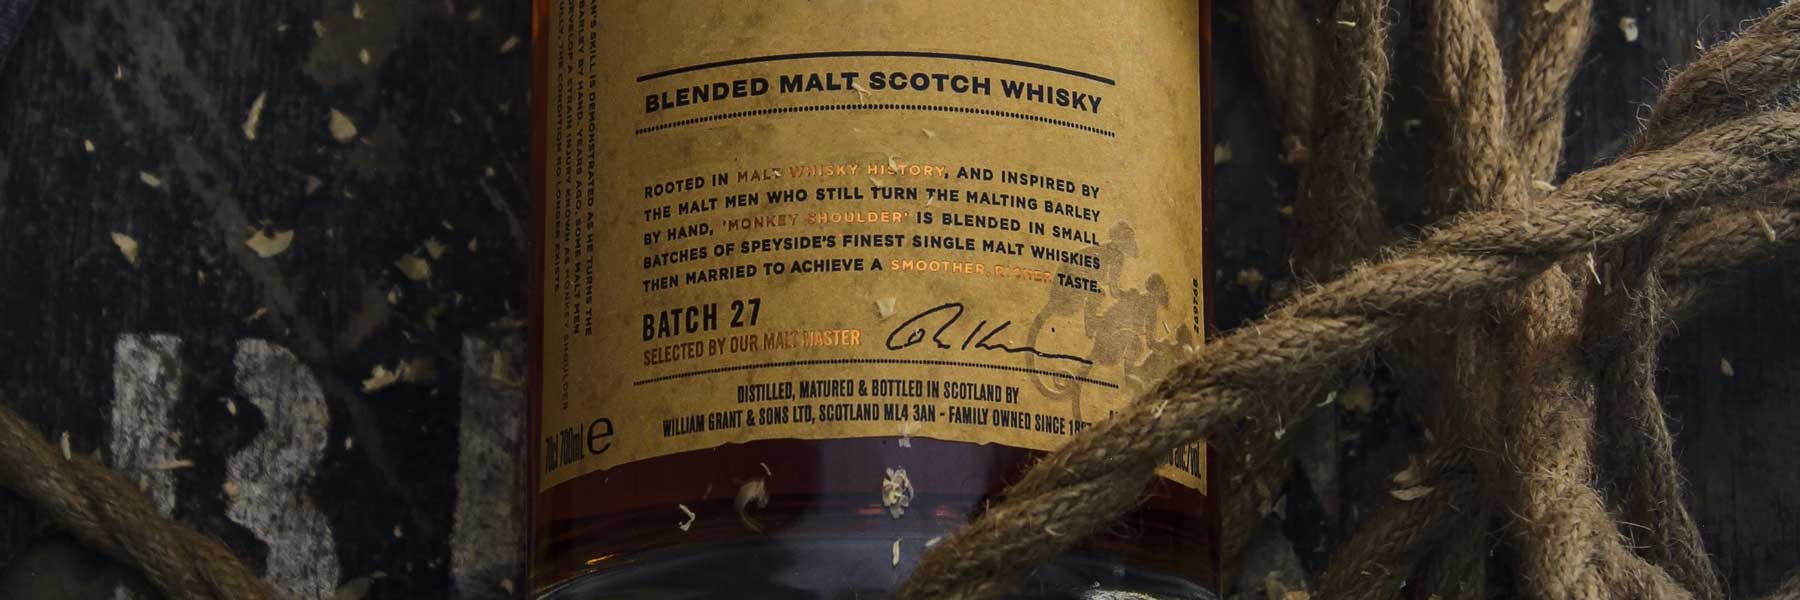 What is blended malt Scotch whisky?